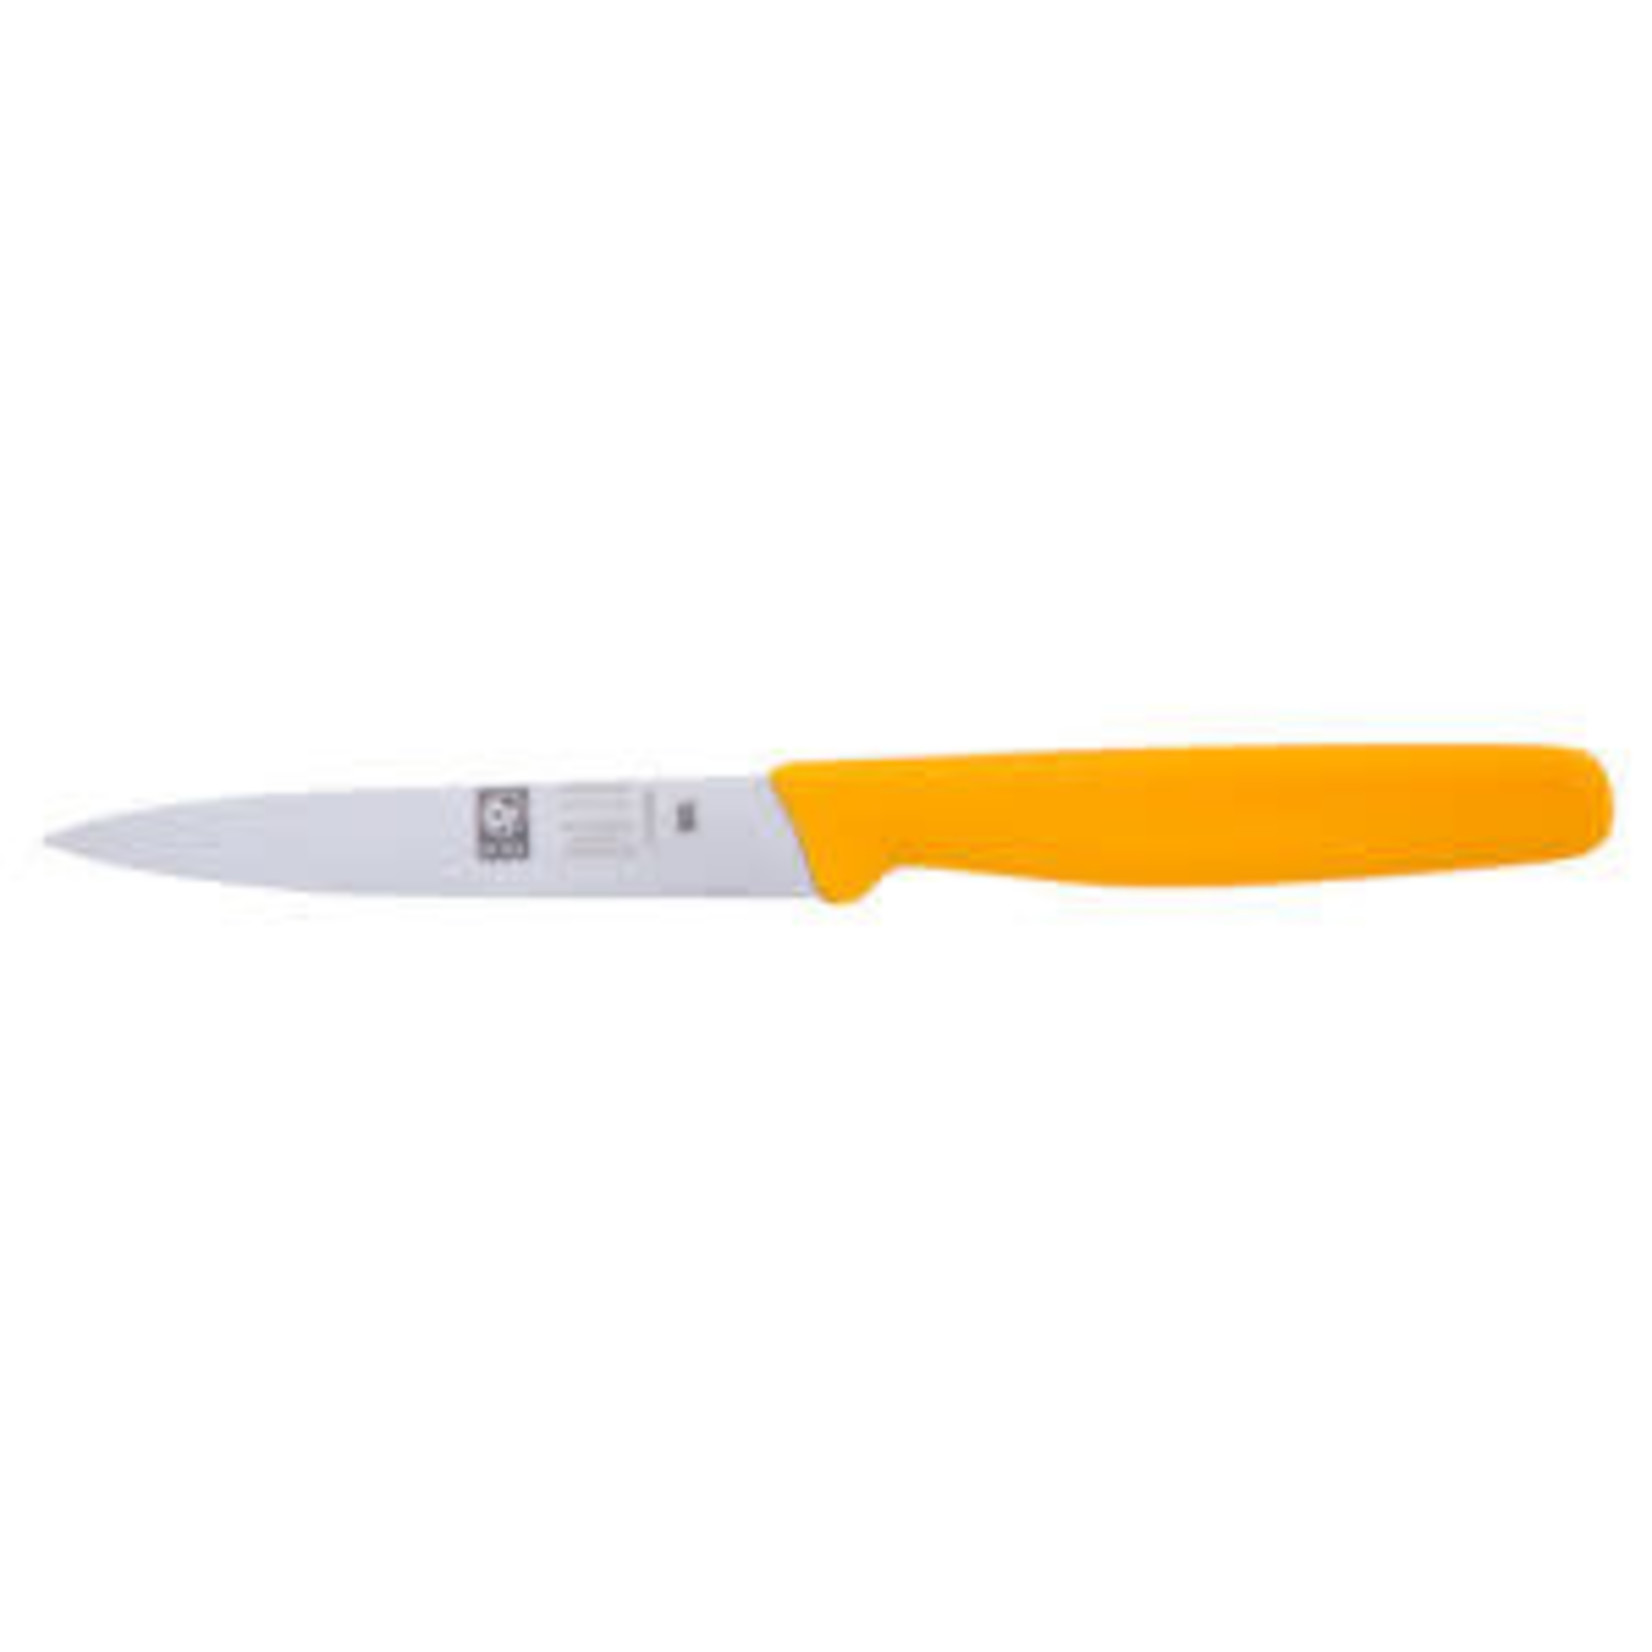 Discount Hardware Icel Yellow 4-Inch Paring Knife, Straight Edge